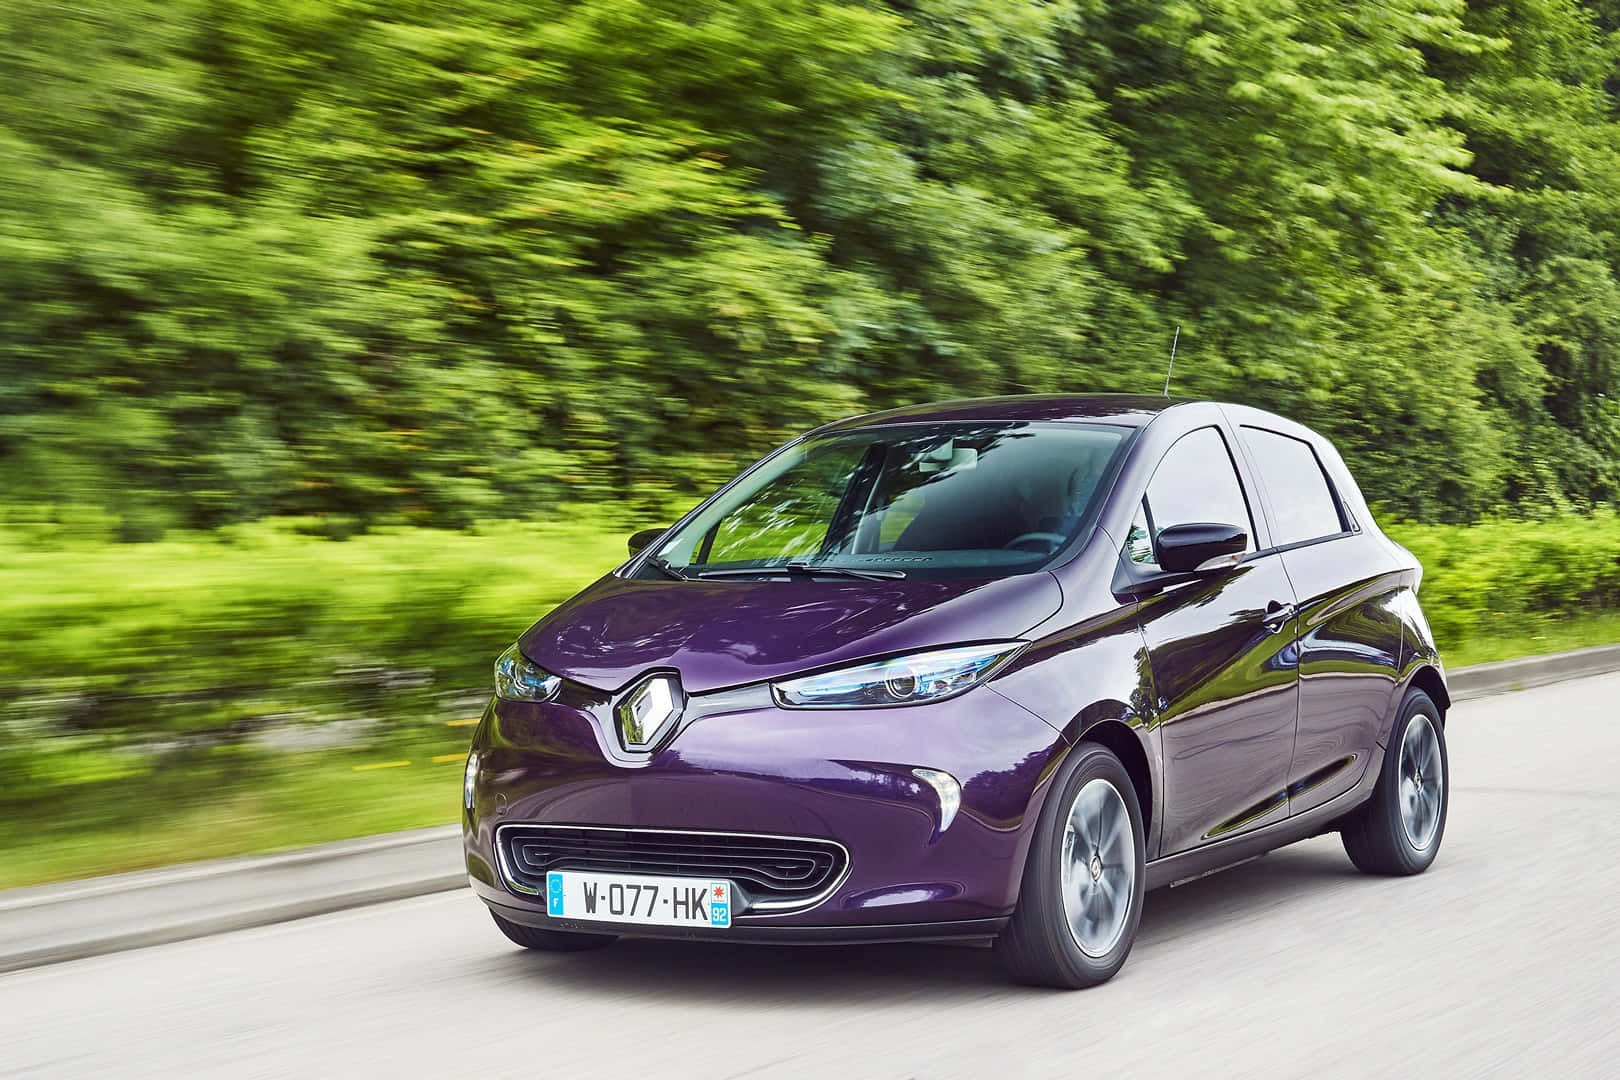 The New Eco-friendly Renault Zoe Electric Car On A Serene Highway Wallpaper